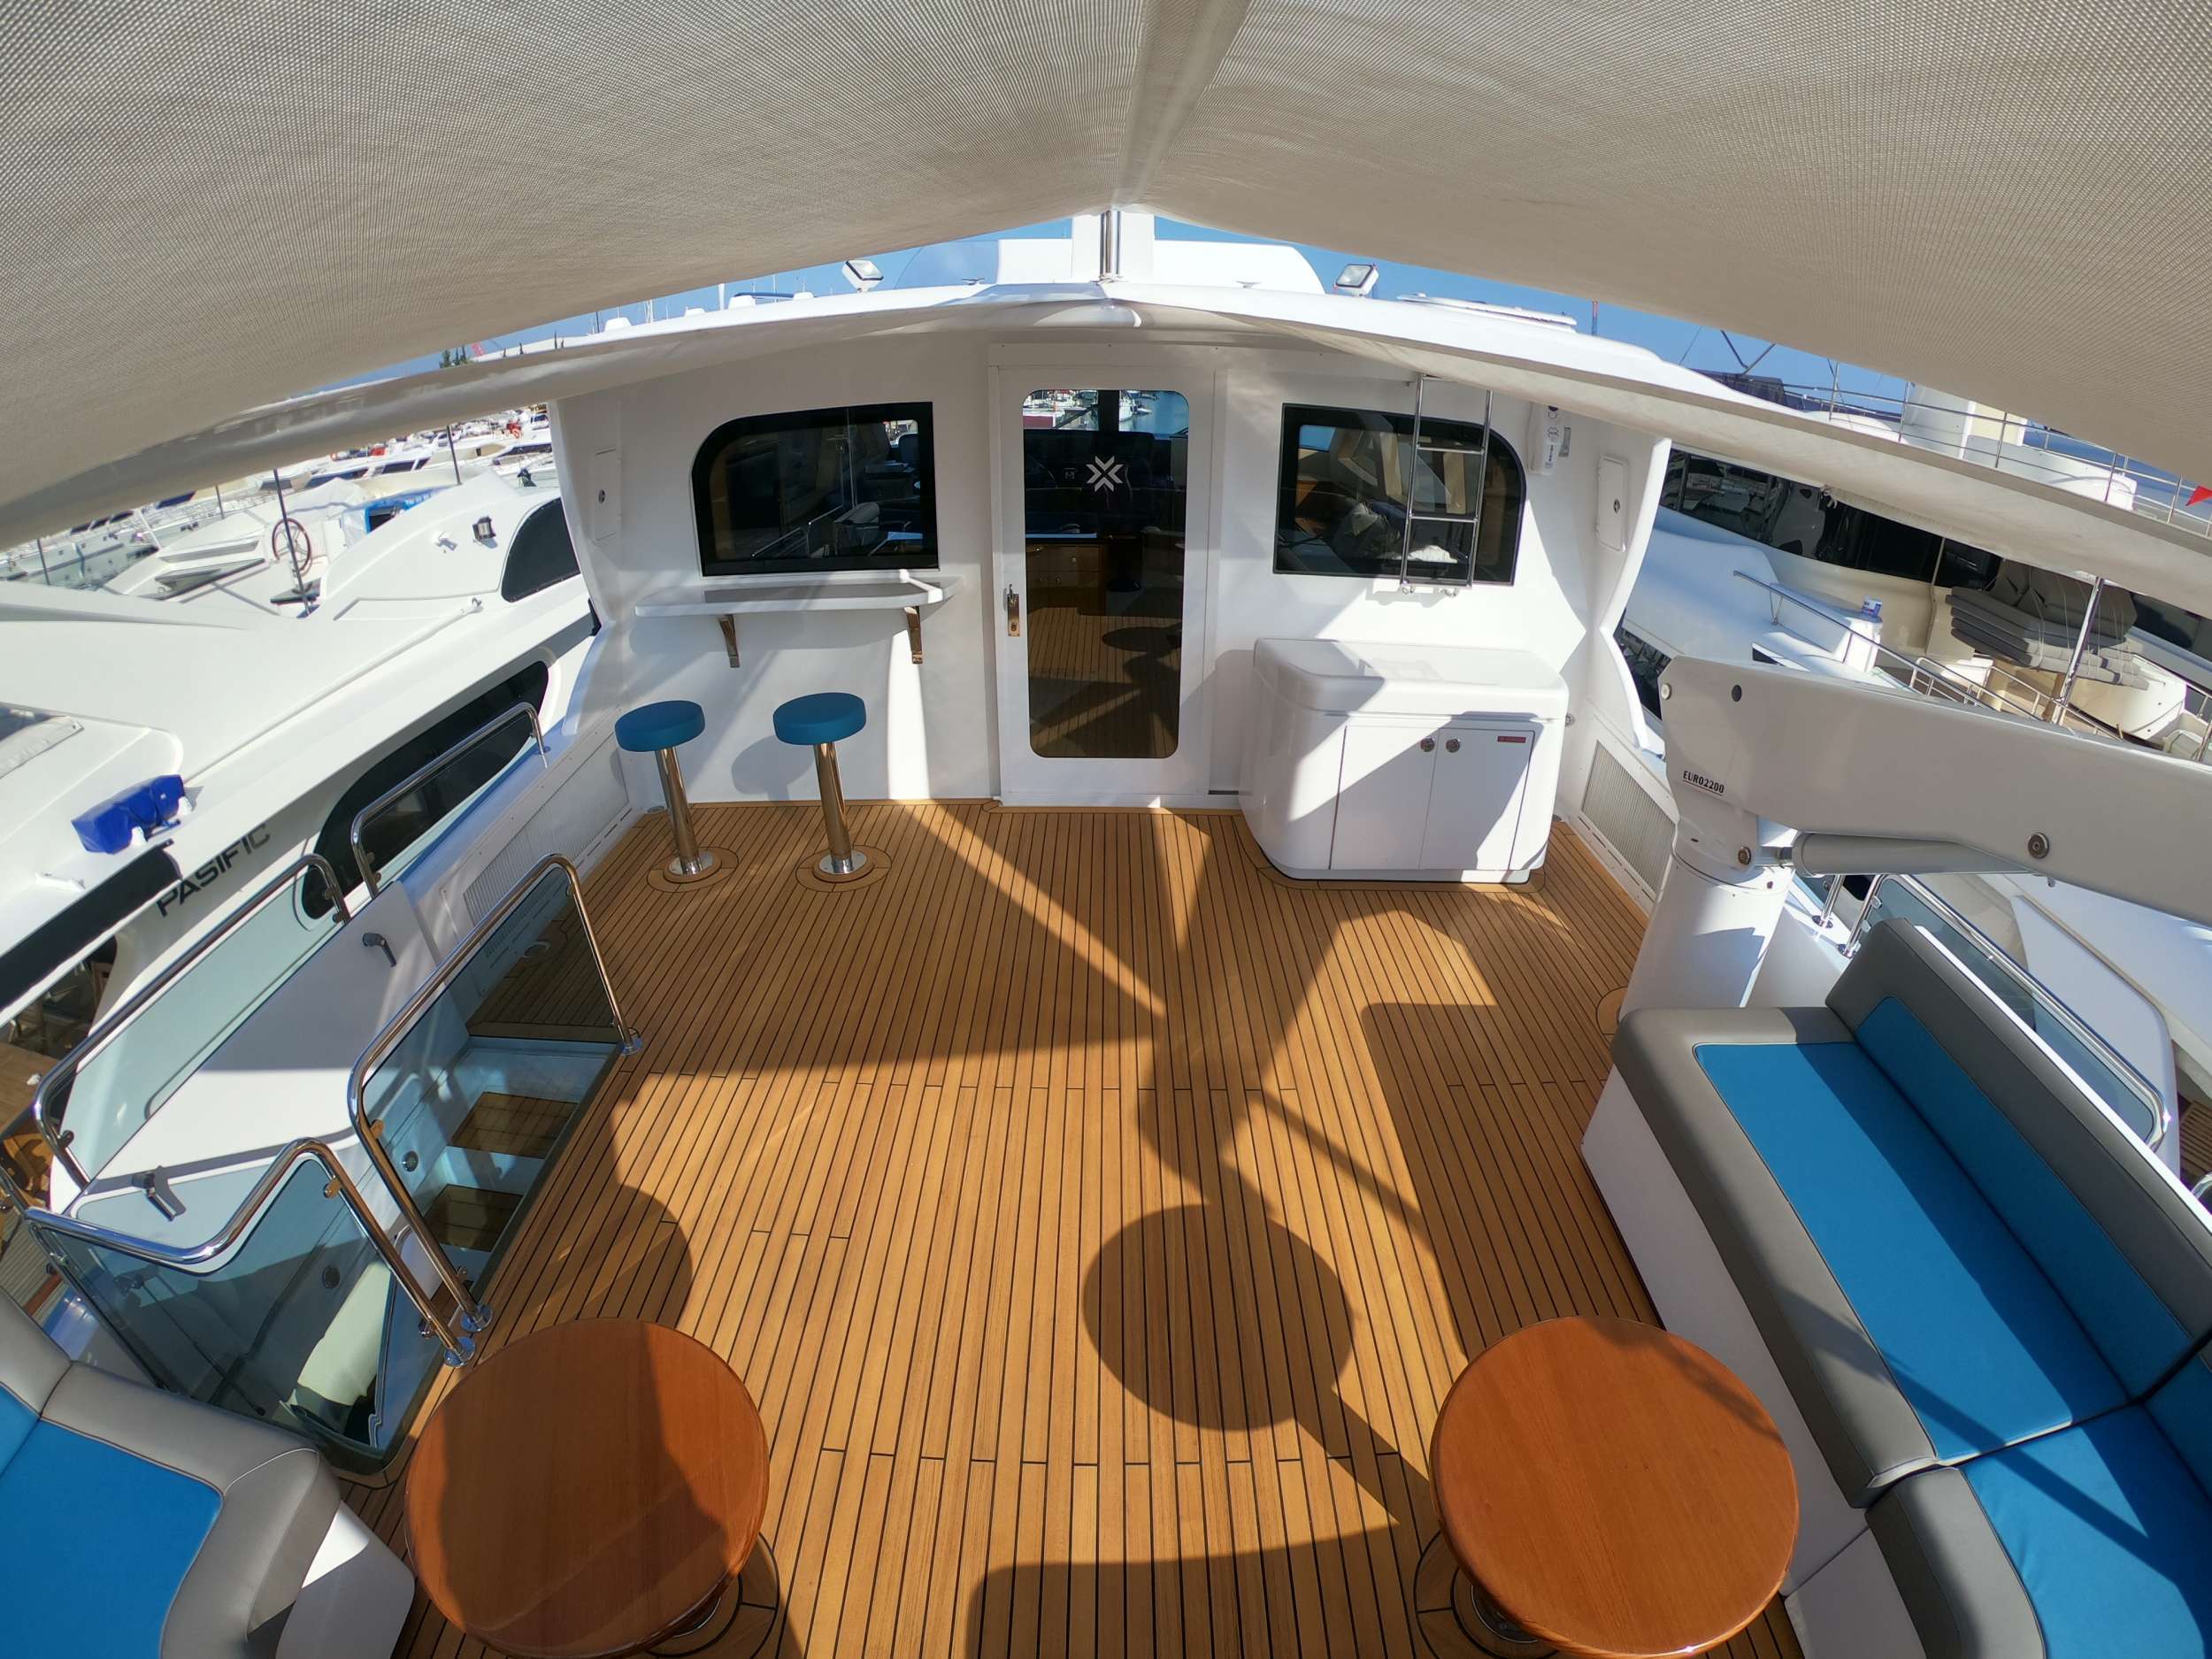 TOP SHELF - Luxury yacht charter St Lucia & Boat hire in Caribbean 6